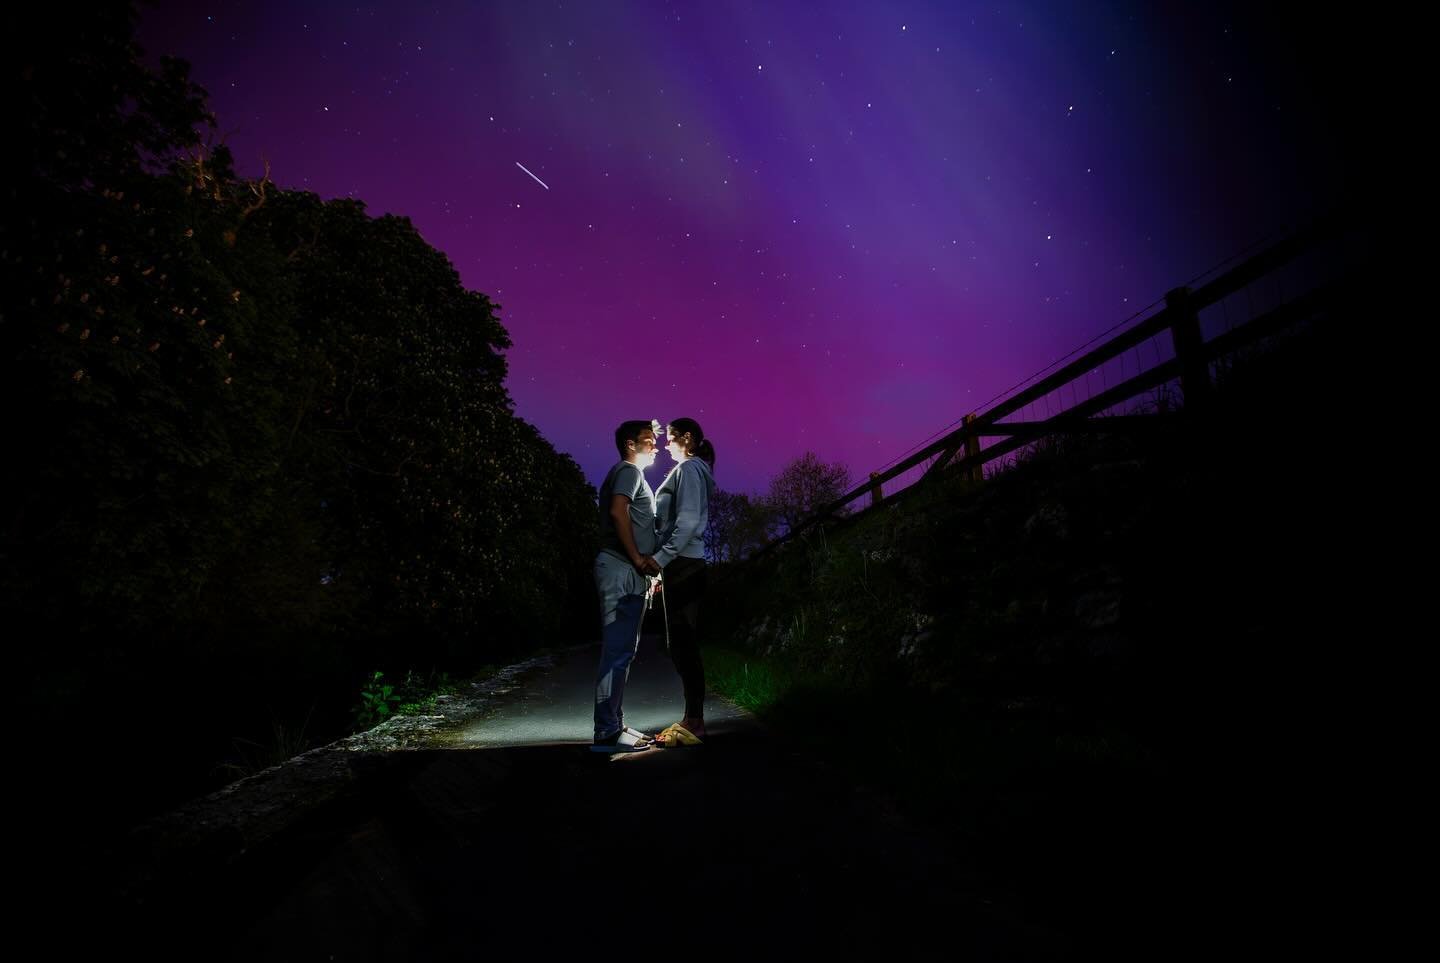 Many thanks to this lovely mother and son whom I met tonight down at the Bowers enjoying the amazing aurora borealis in the sky. They were very kind to participate in this photo for me. I had been out my back taking photos and the trampoline  and hou